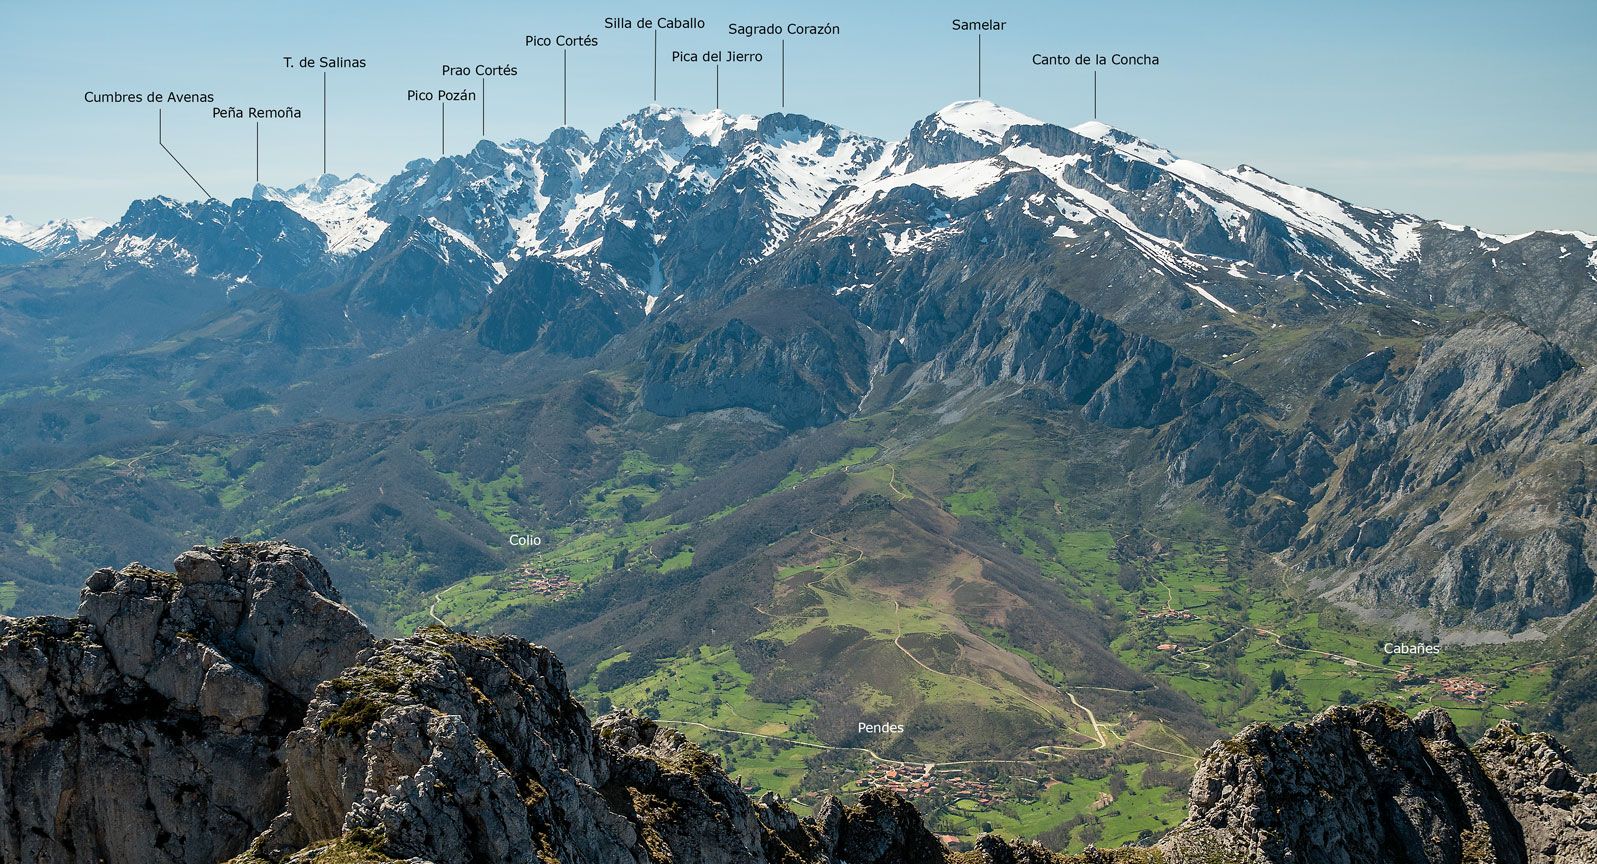 Picos de Europa in the Cantabrian Mountains of North West Spain